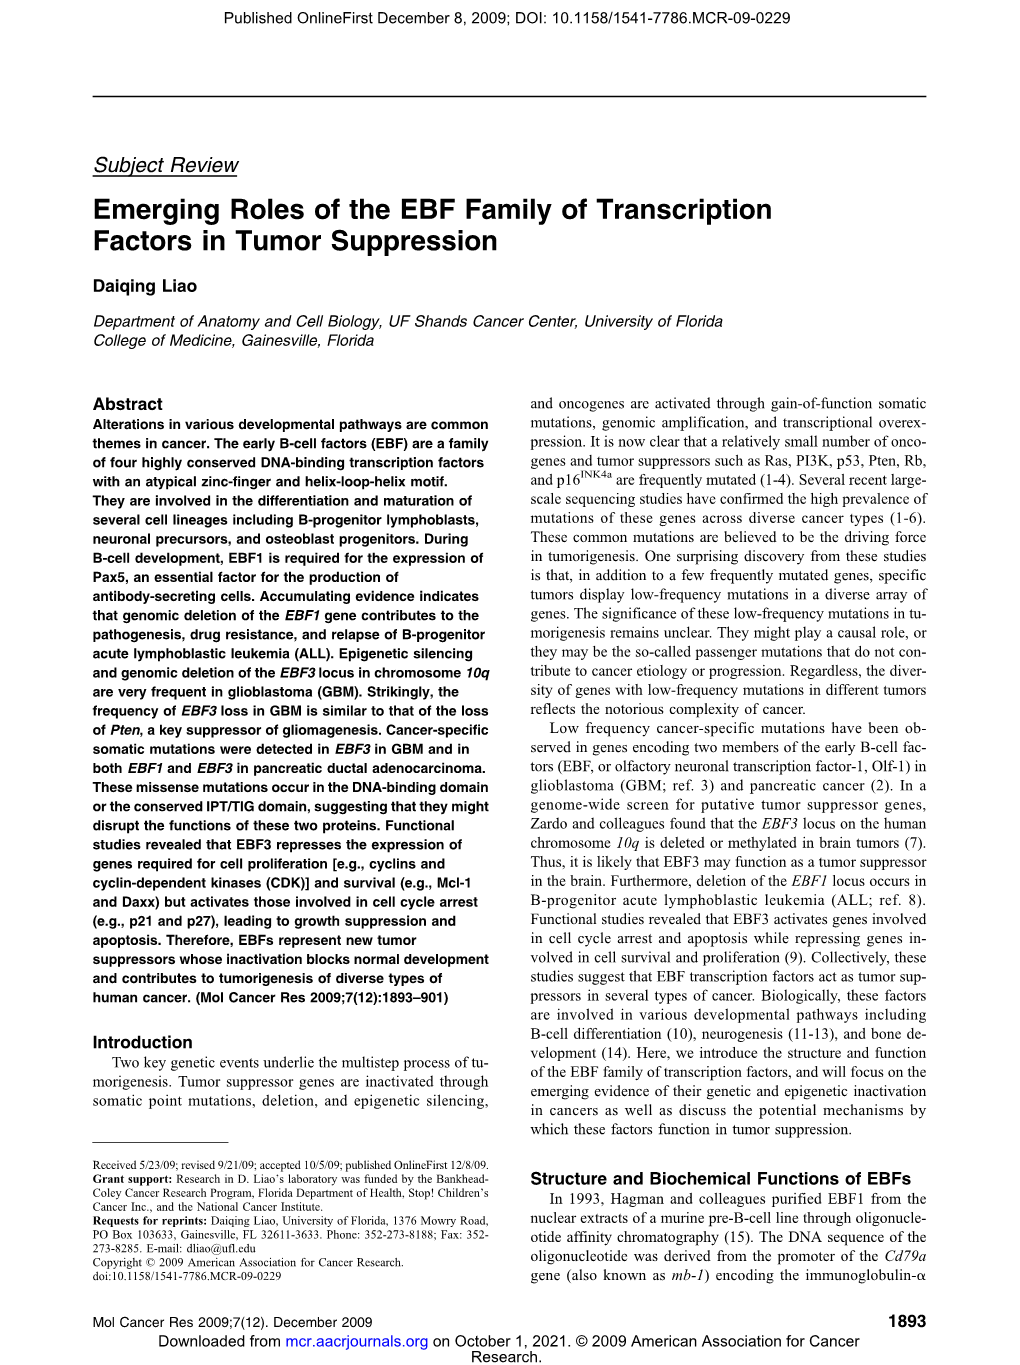 Emerging Roles of the EBF Family of Transcription Factors in Tumor Suppression